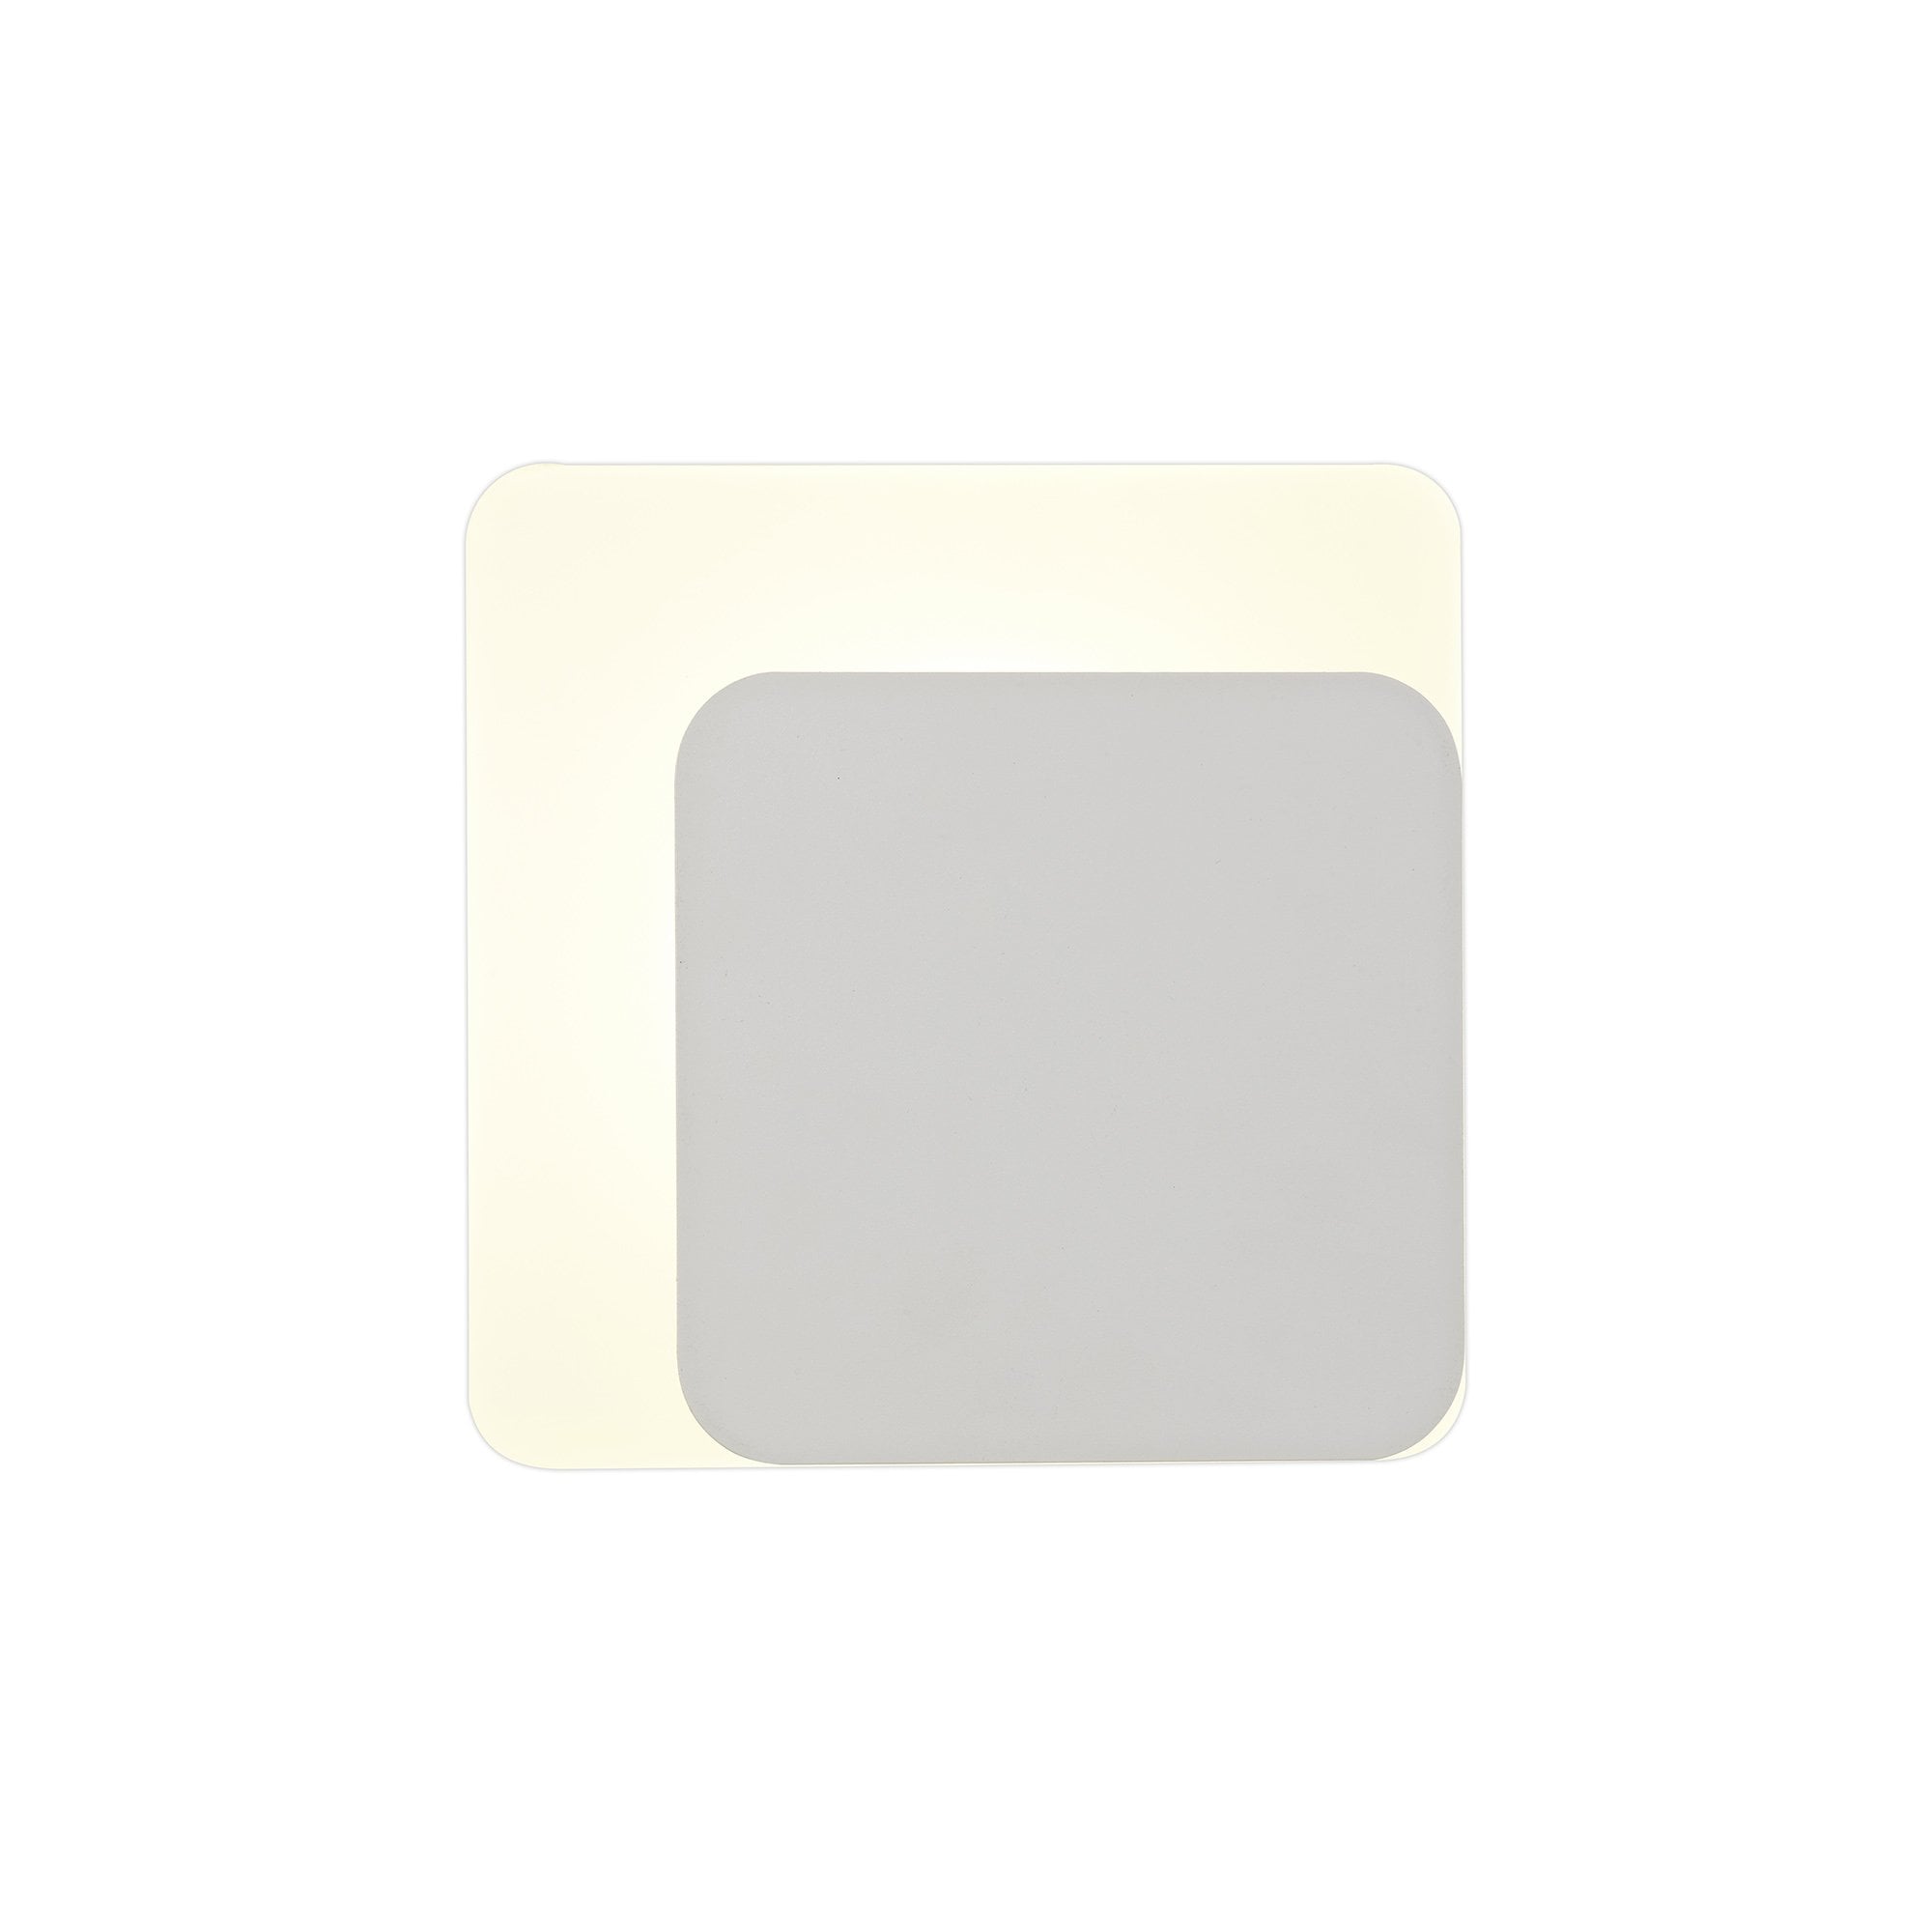 Magnetic Base Wall Lamp, 12W LED 3000K 498lm, 15/19cm Square Right Offset, Sand White/Acrylic Frosted Diffuser